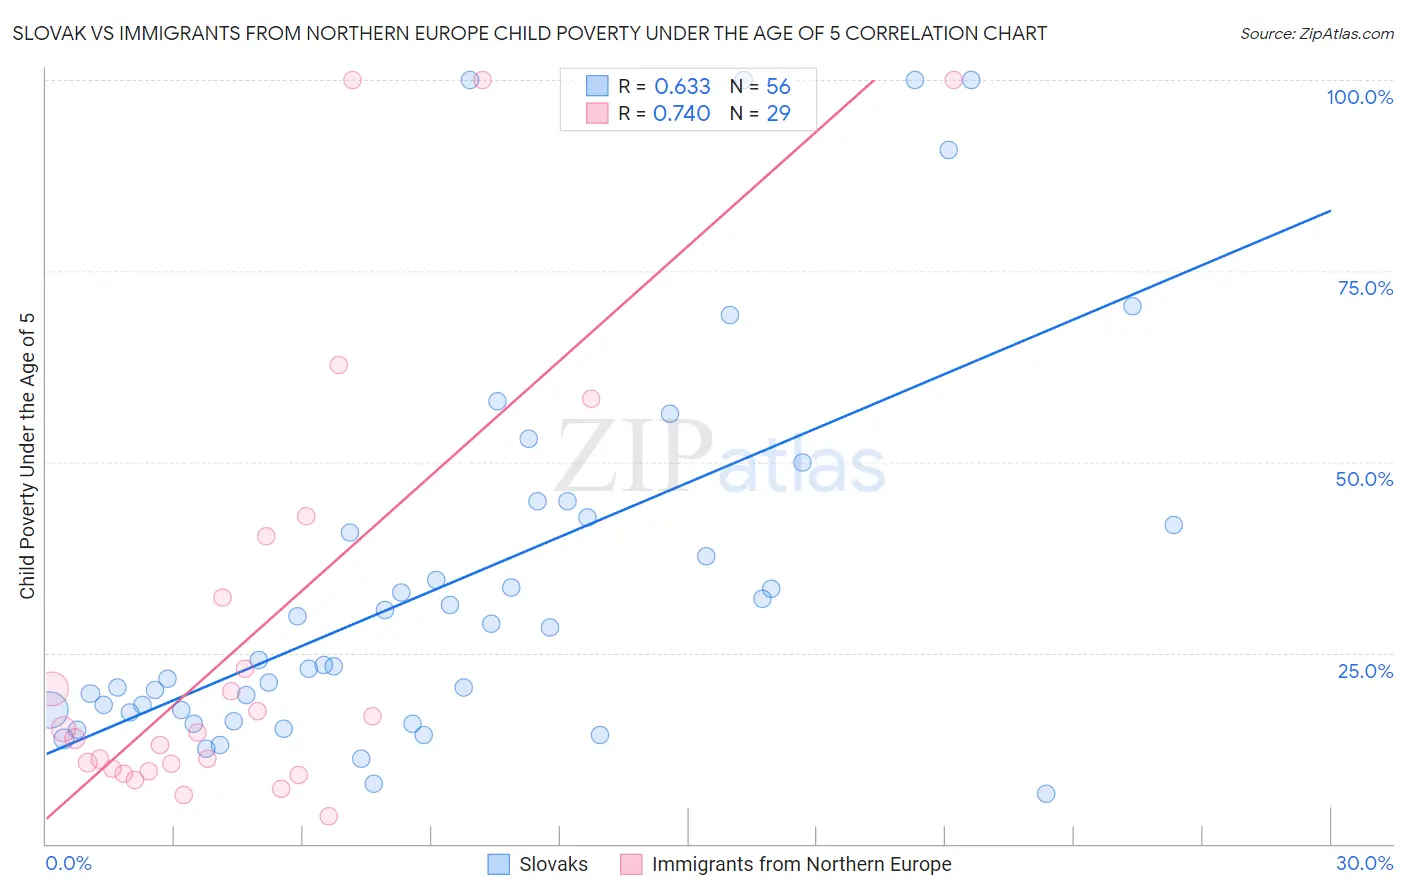 Slovak vs Immigrants from Northern Europe Child Poverty Under the Age of 5